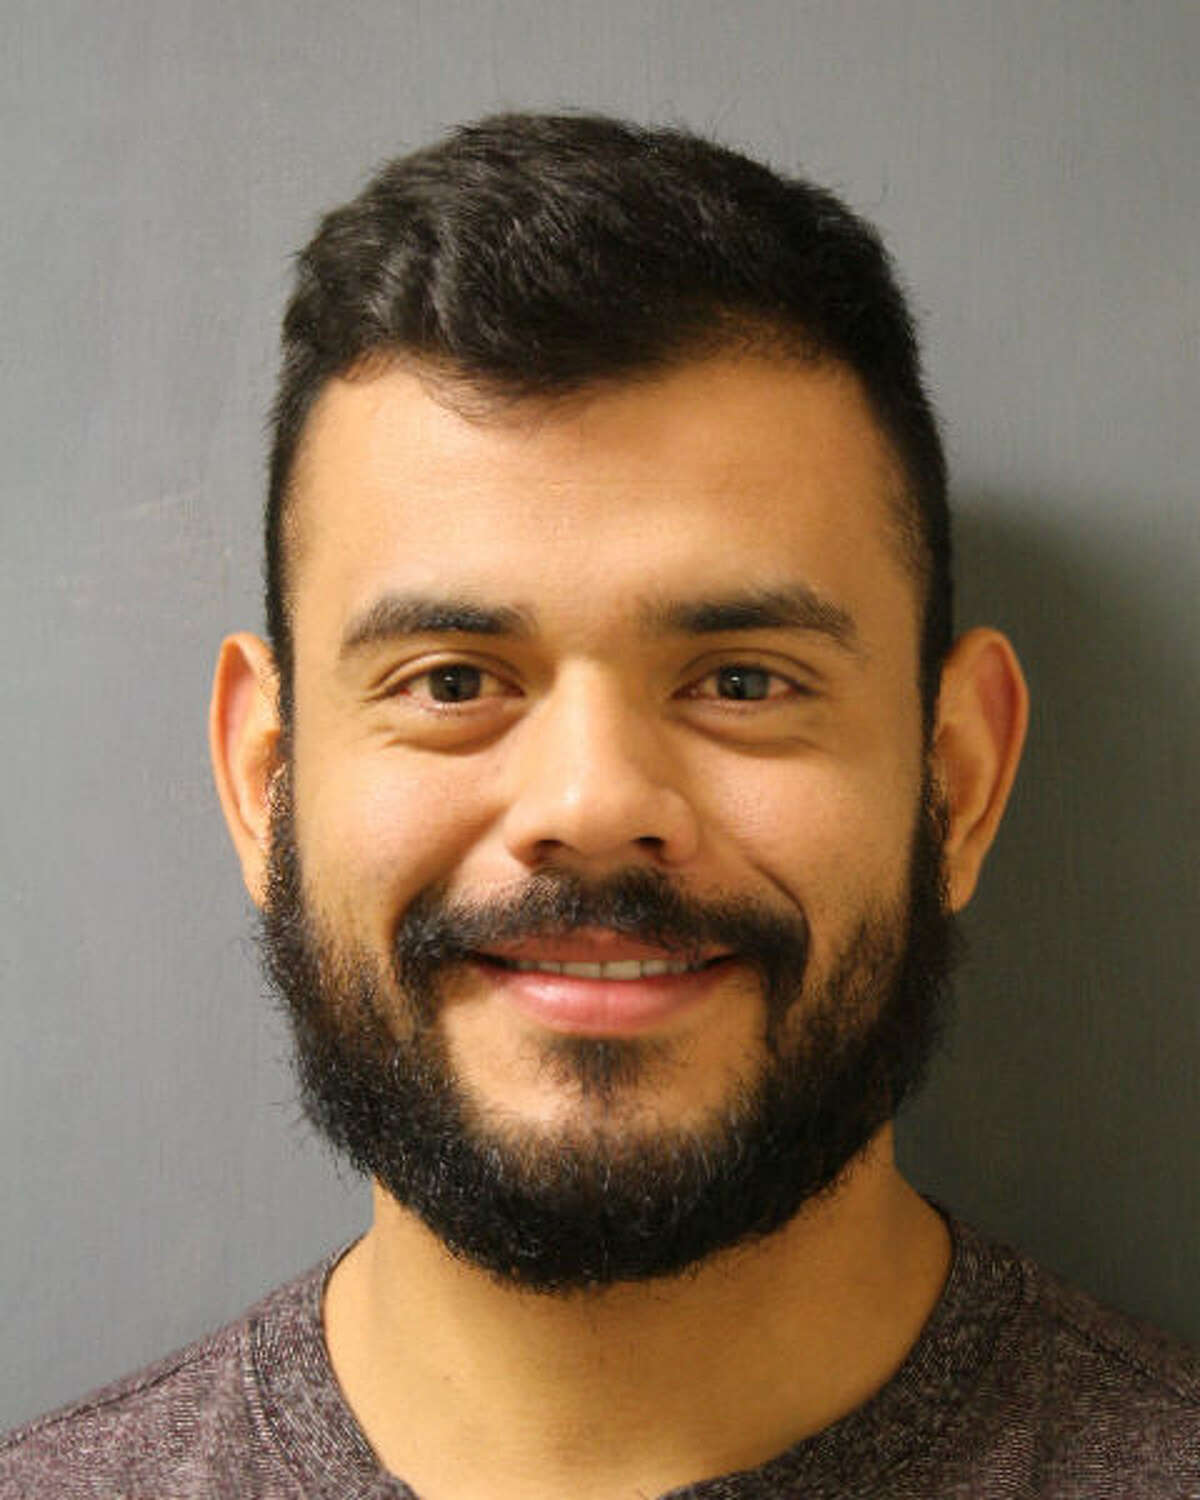 Vidal Valladares' mugshot in connection with his obstruction of roadway charge after her blocked traffic on I-45 on Sunday to propose to his girlfriend.